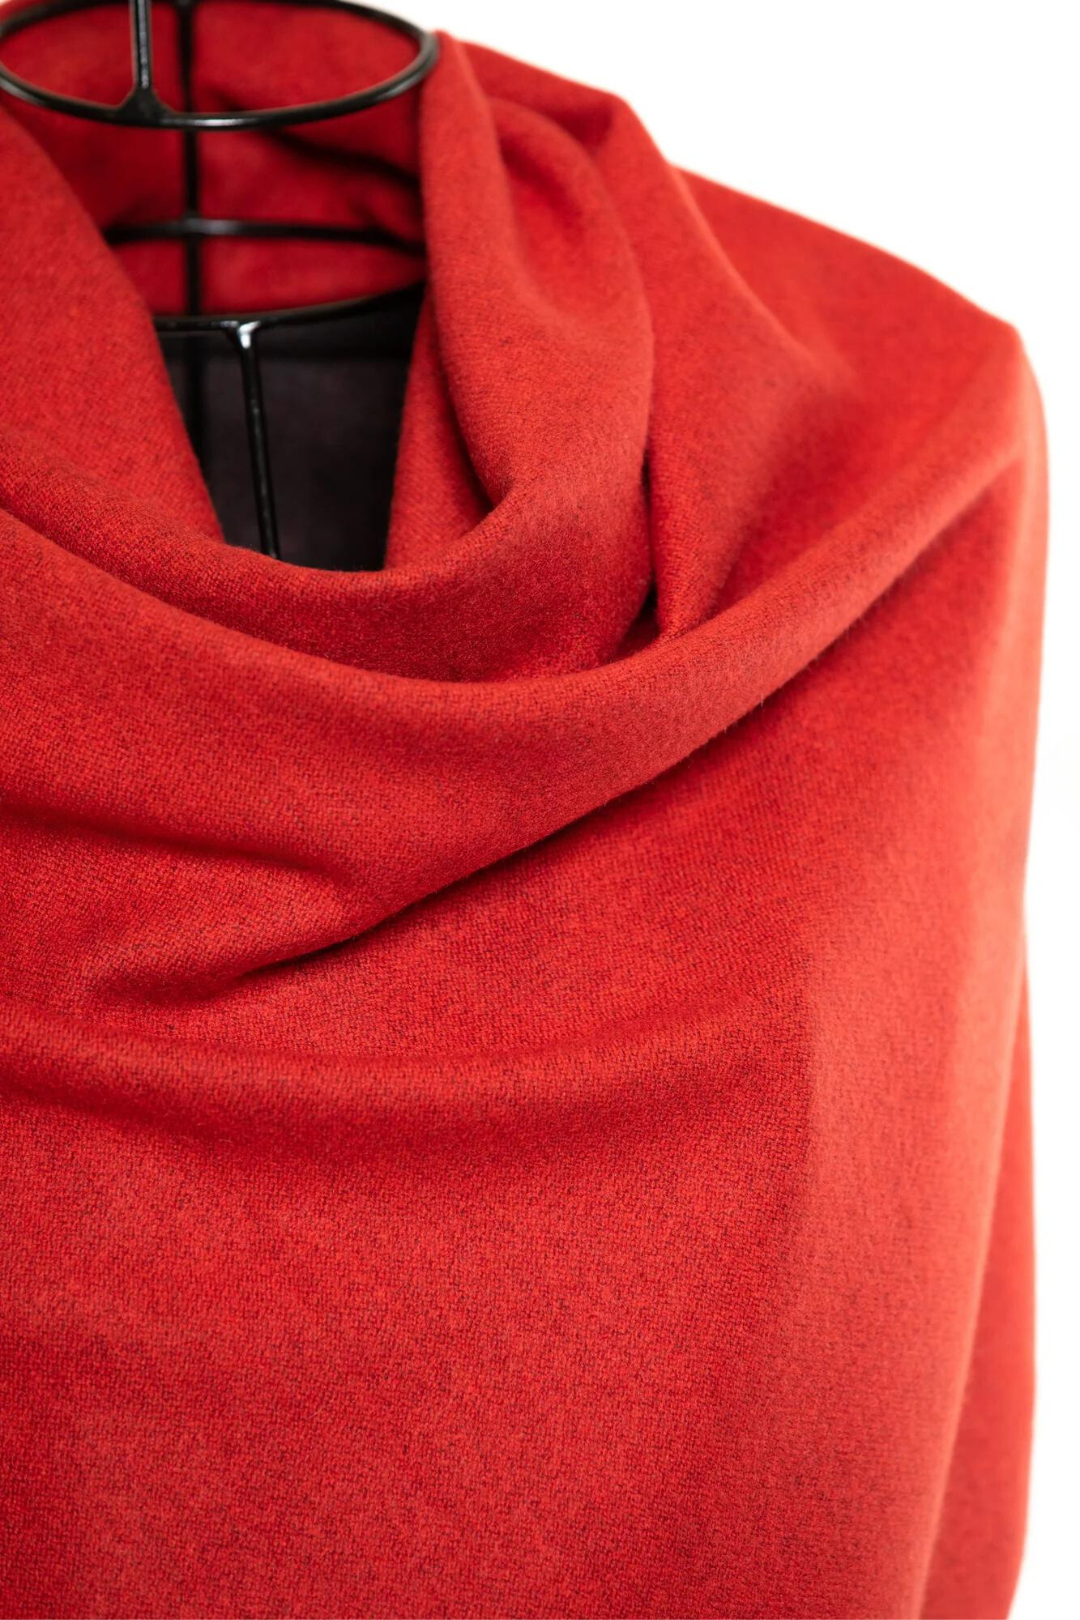 Reversible Mo-shmere Color Block Shawl - Red Black